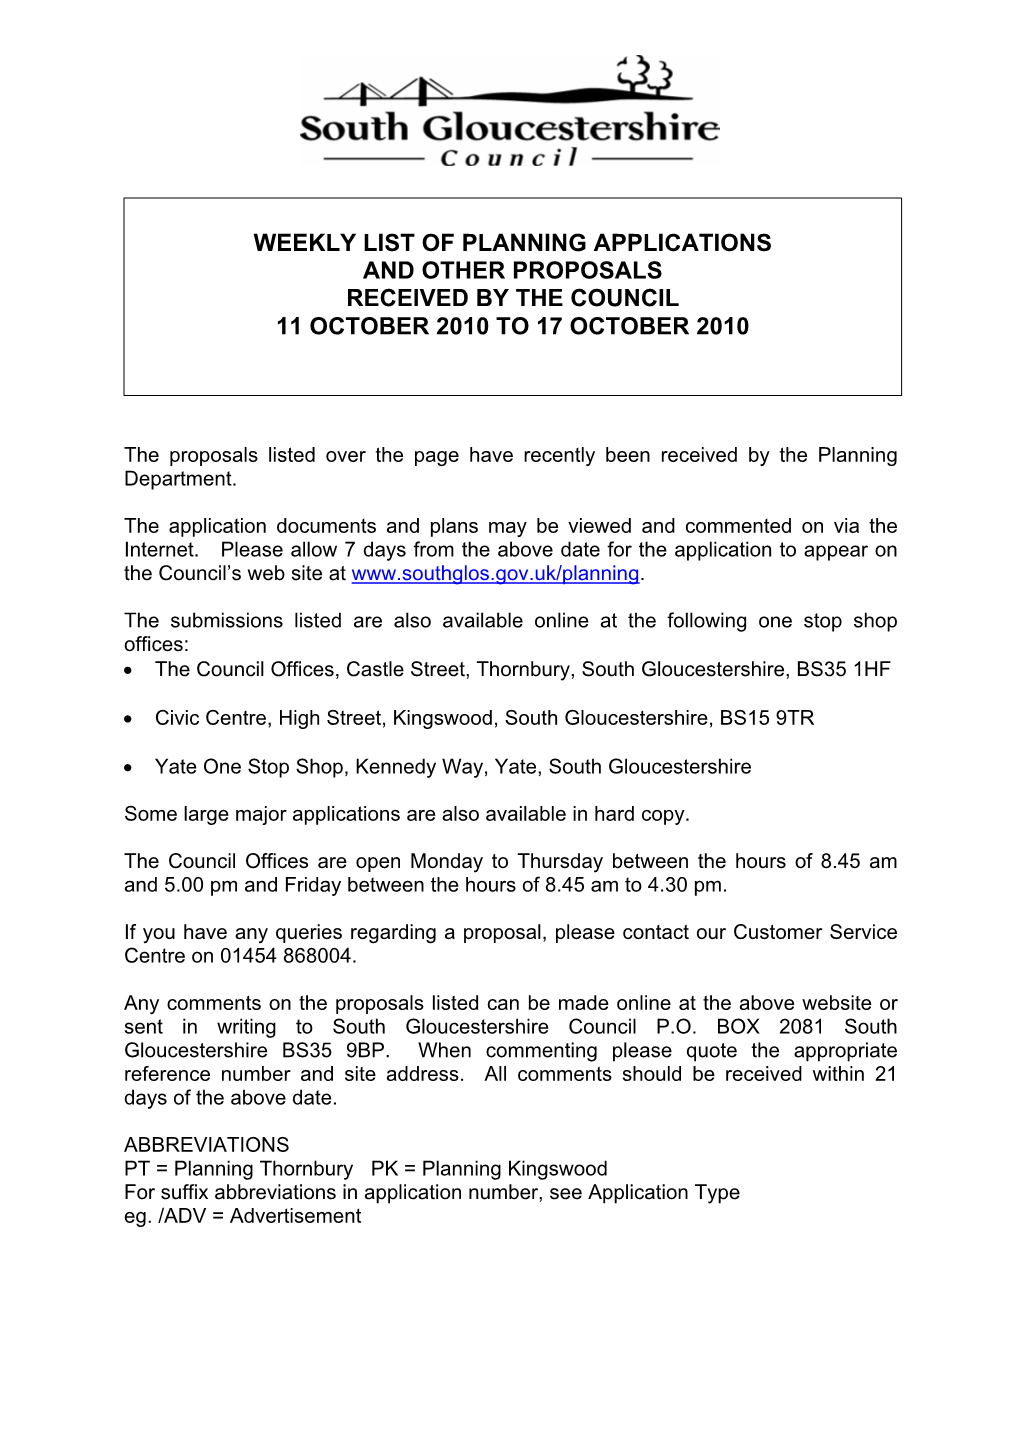 Weekly List of Planning Applications and Other Proposals Received by the Council 11 October 2010 to 17 October 2010